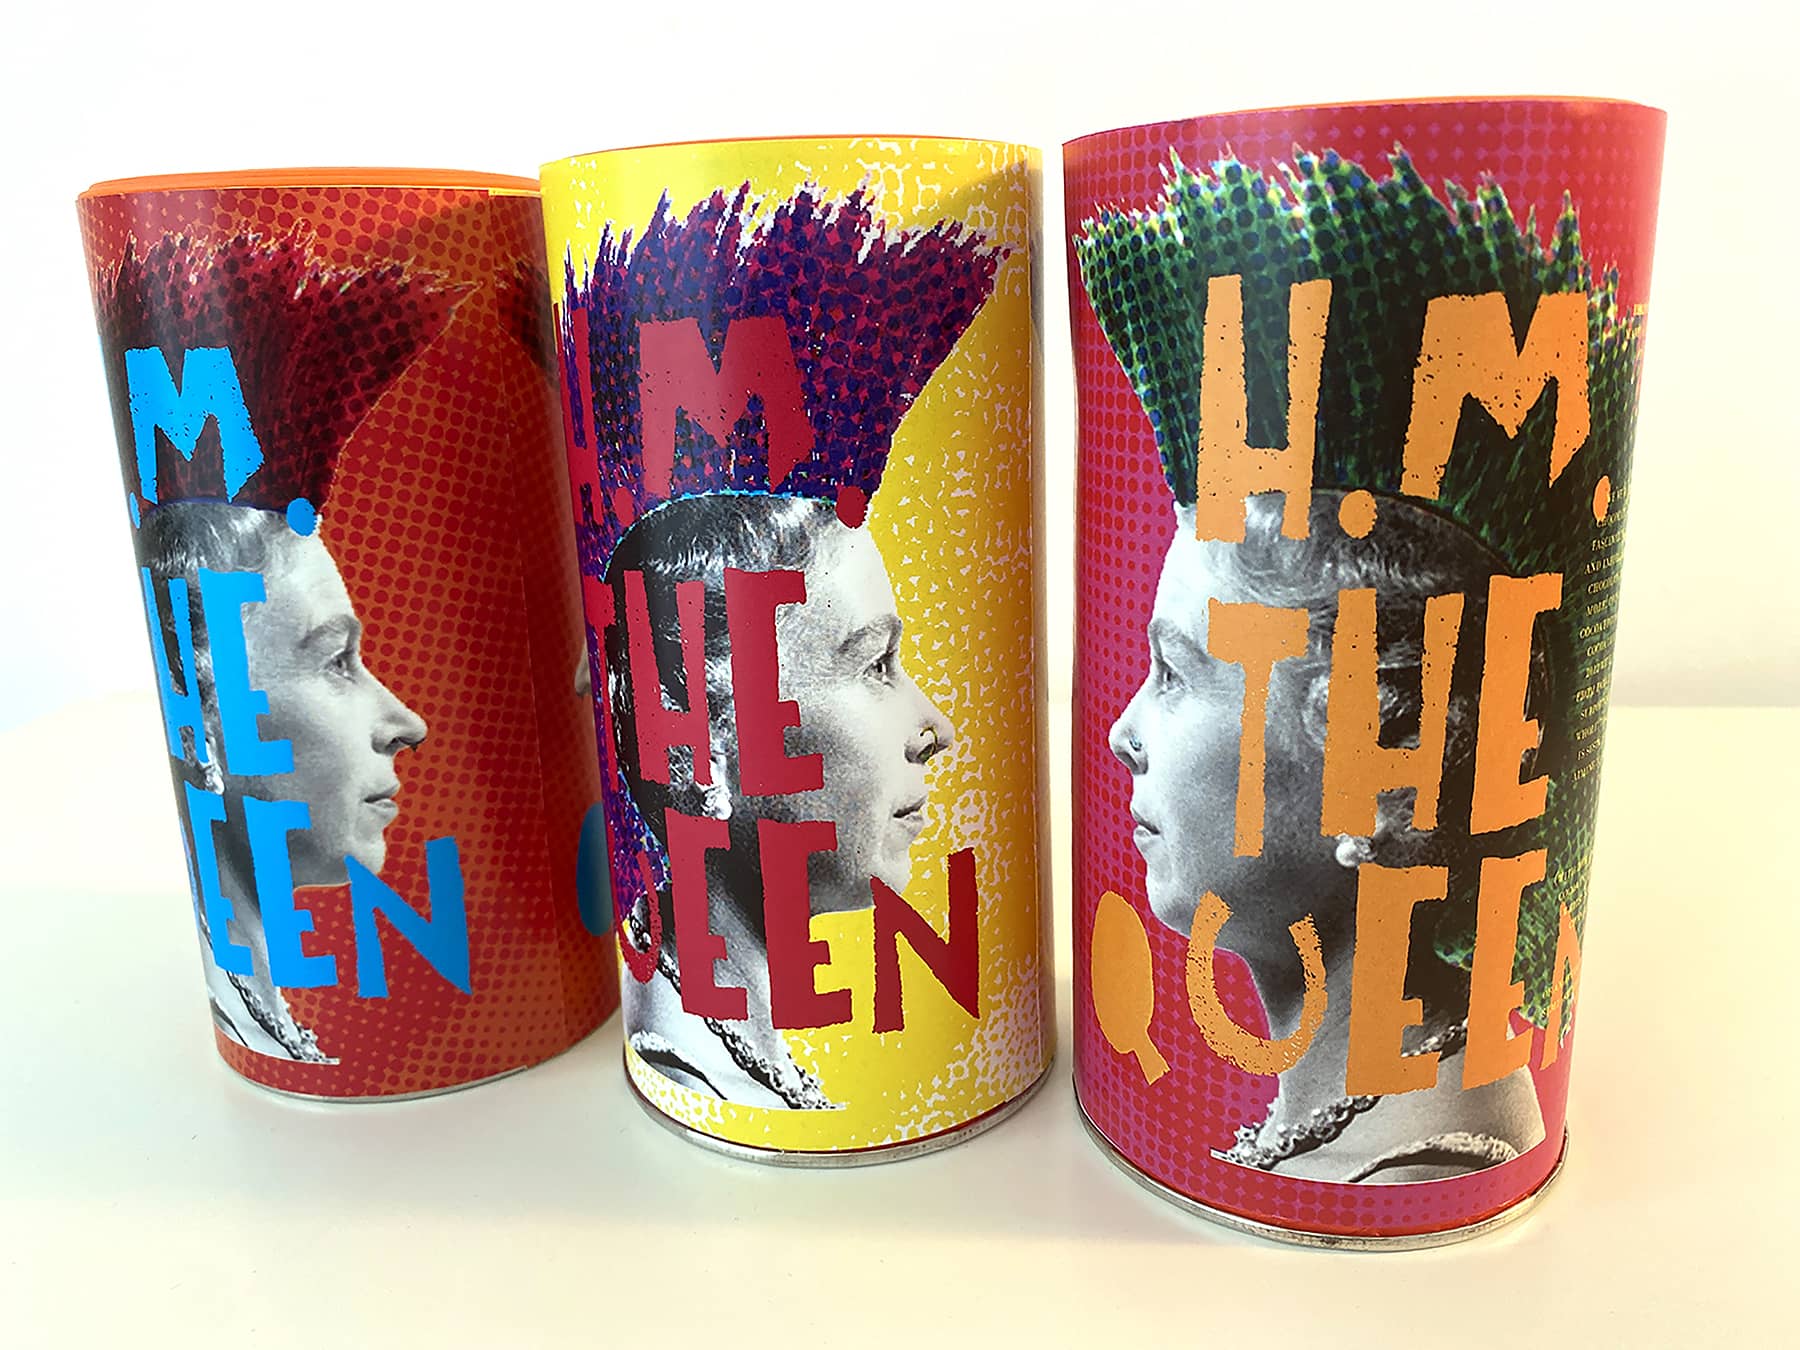 Packaging for Cadbury's Cocao. Image of Queen Elizabeth in a punk style. 